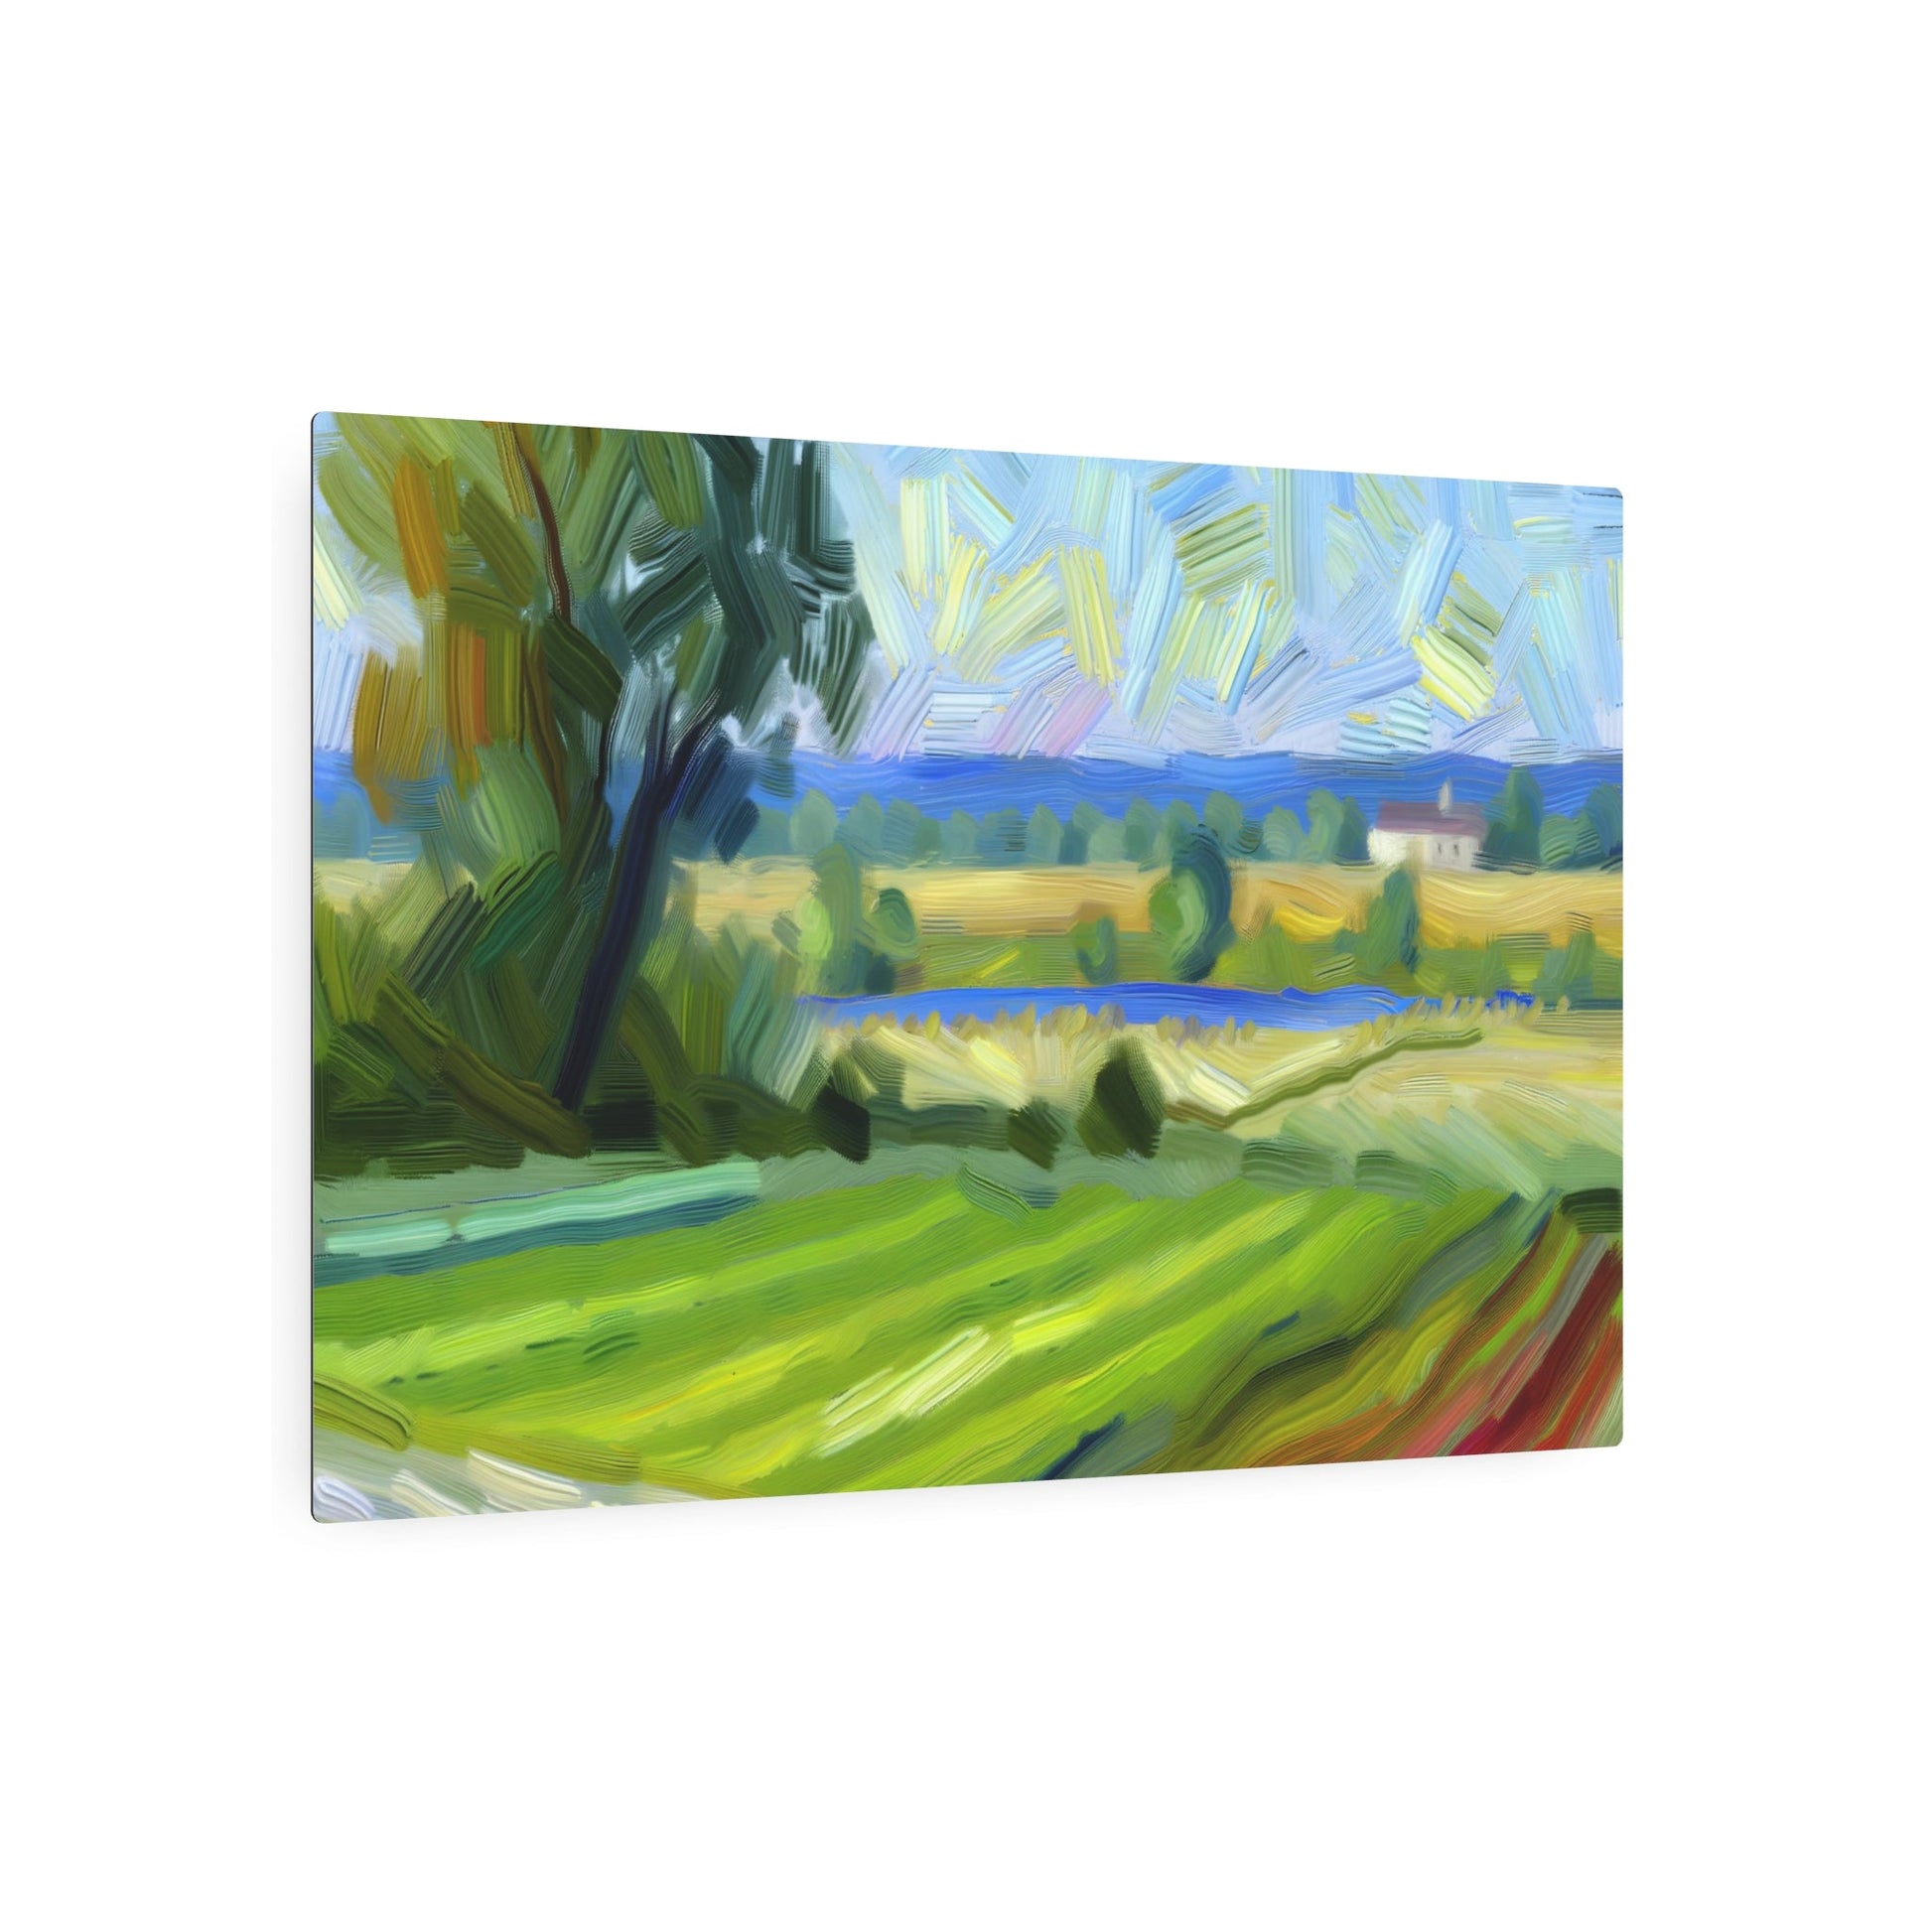 Metal Poster Art | "Impressionist Countryside Landscape Artwork - Vibrant Colors, Visible Brush Strokes, Light & Movement - Dalle-3 Generated Western Style - Metal Poster Art 36″ x 24″ (Horizontal) 0.12''